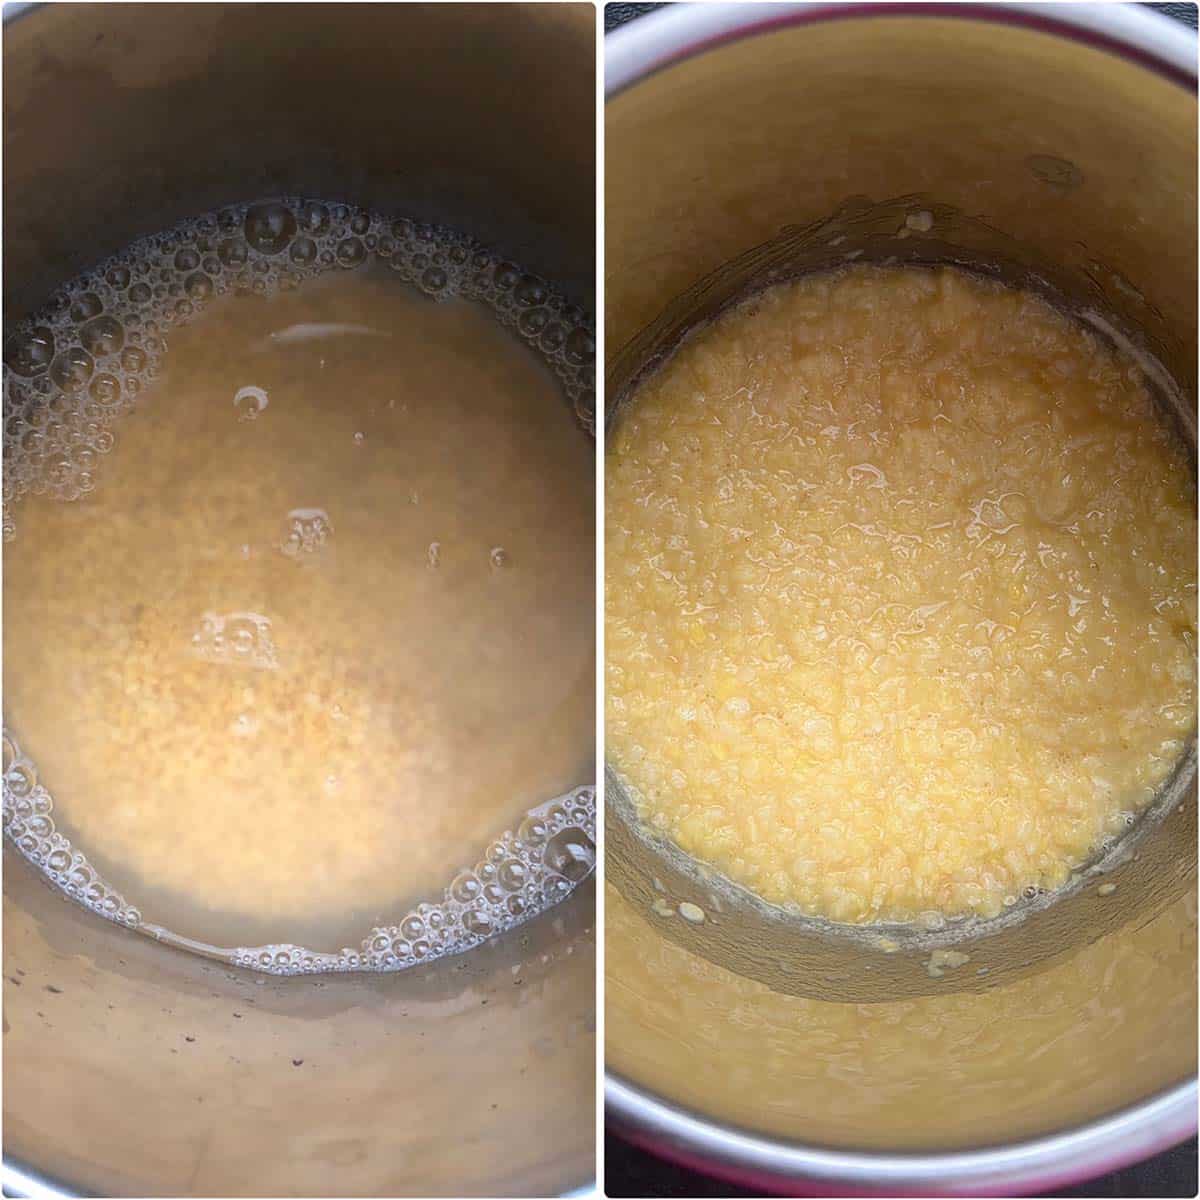 2 panel photo showing moong dal before and after cooking.